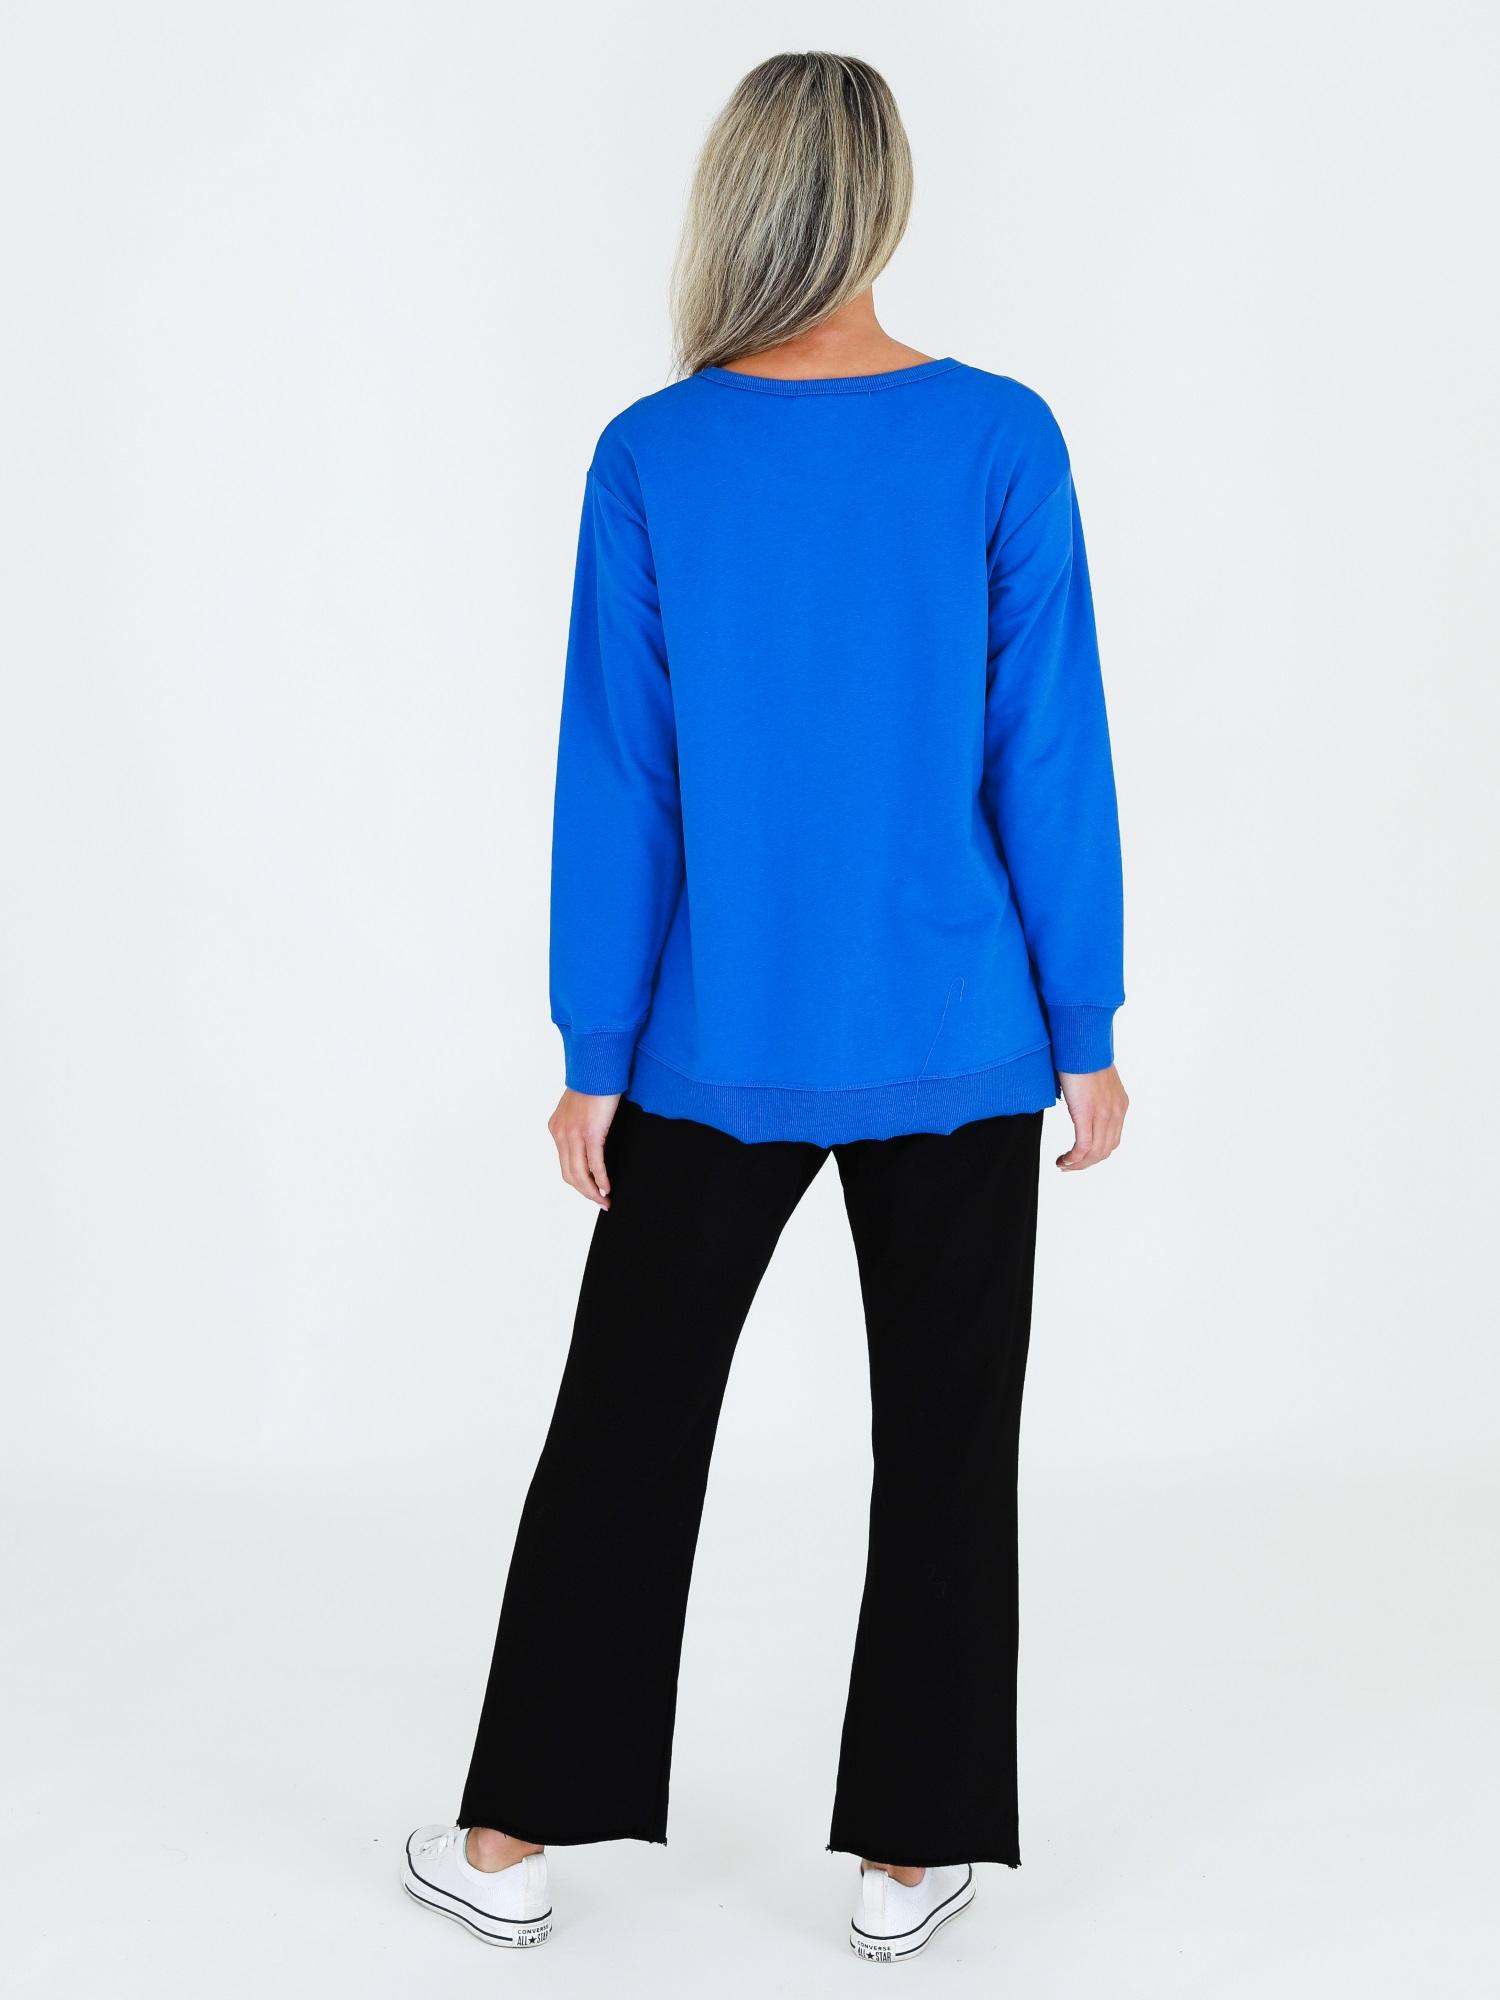 Blue Sweater Women #color_supersonic